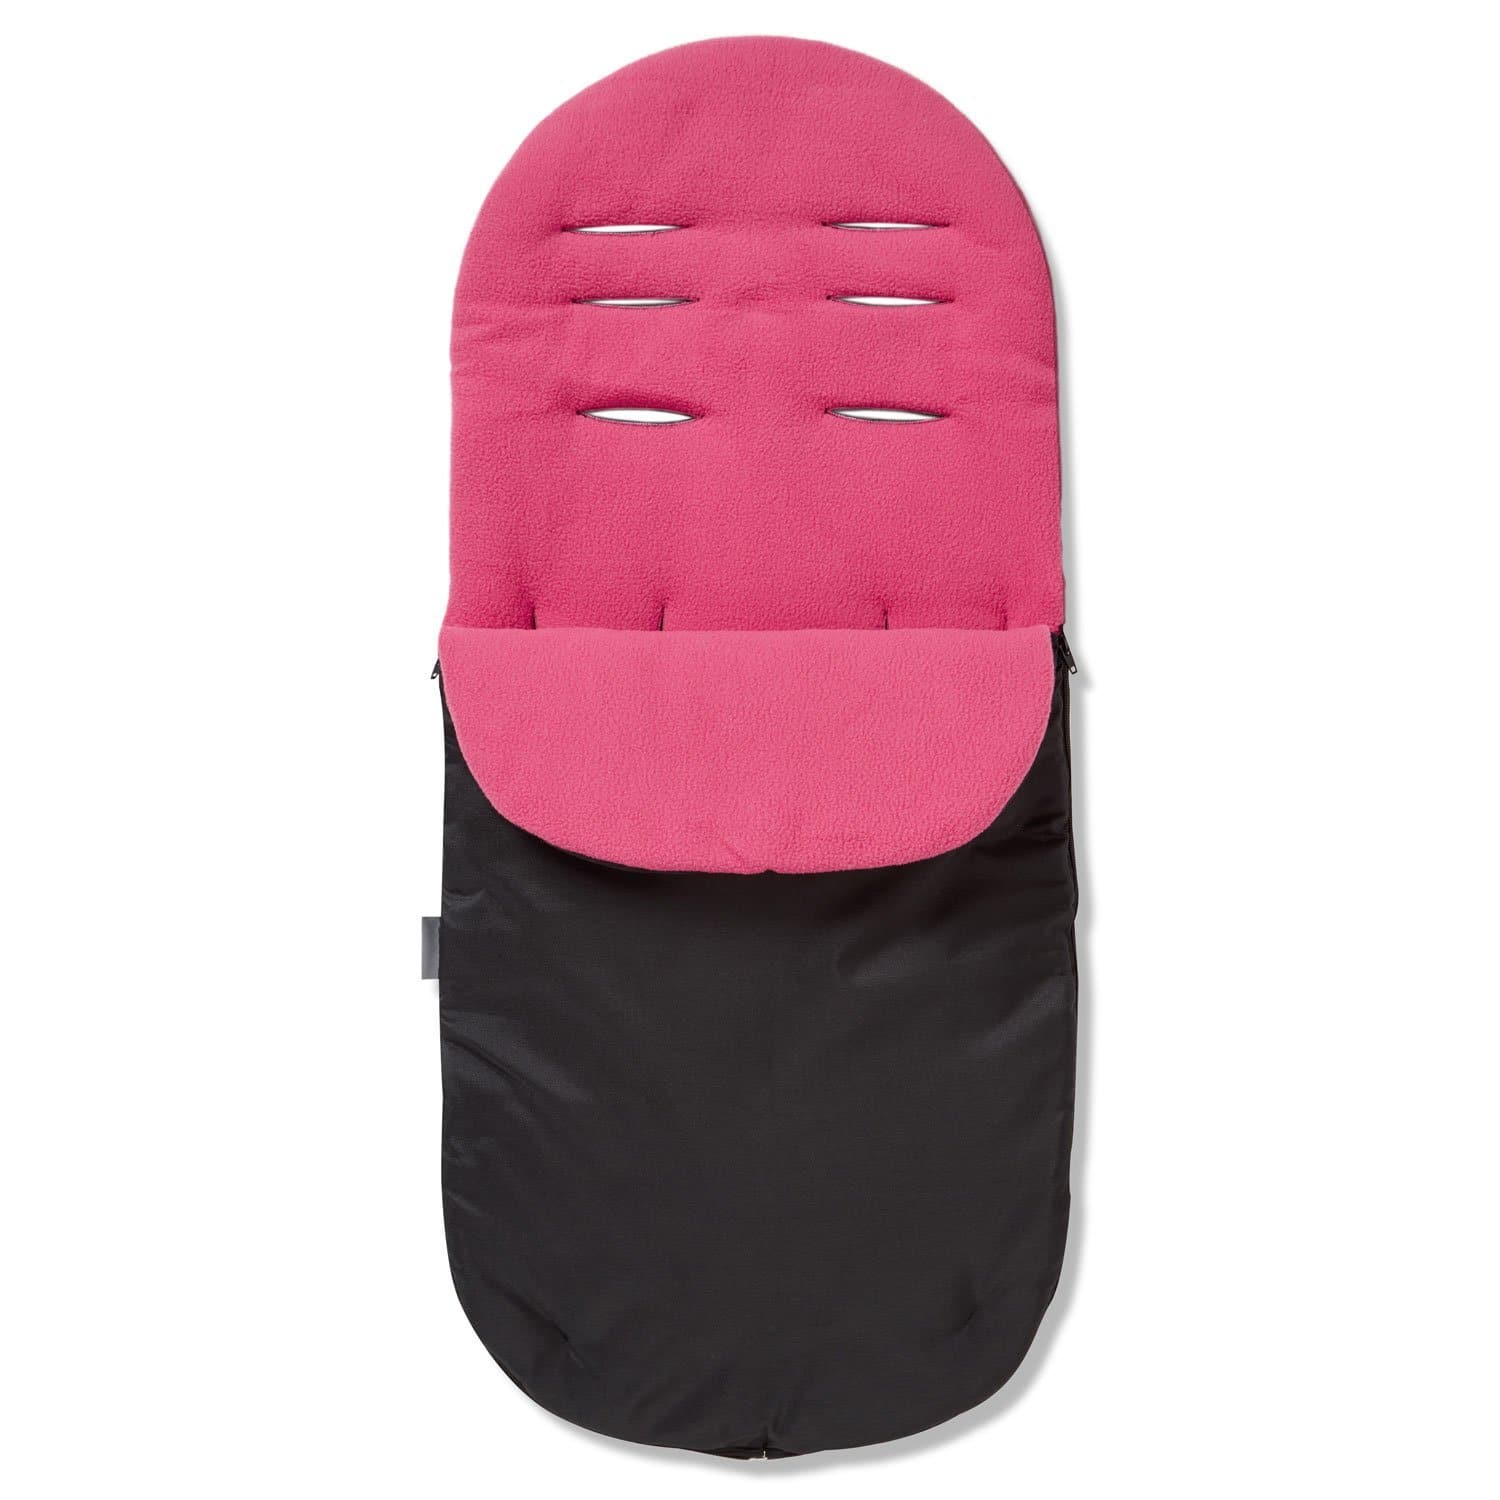 Footmuff / Cosy Toes Compatible with Emmaljunga - Dark Pink / Fits All Models | For Your Little One